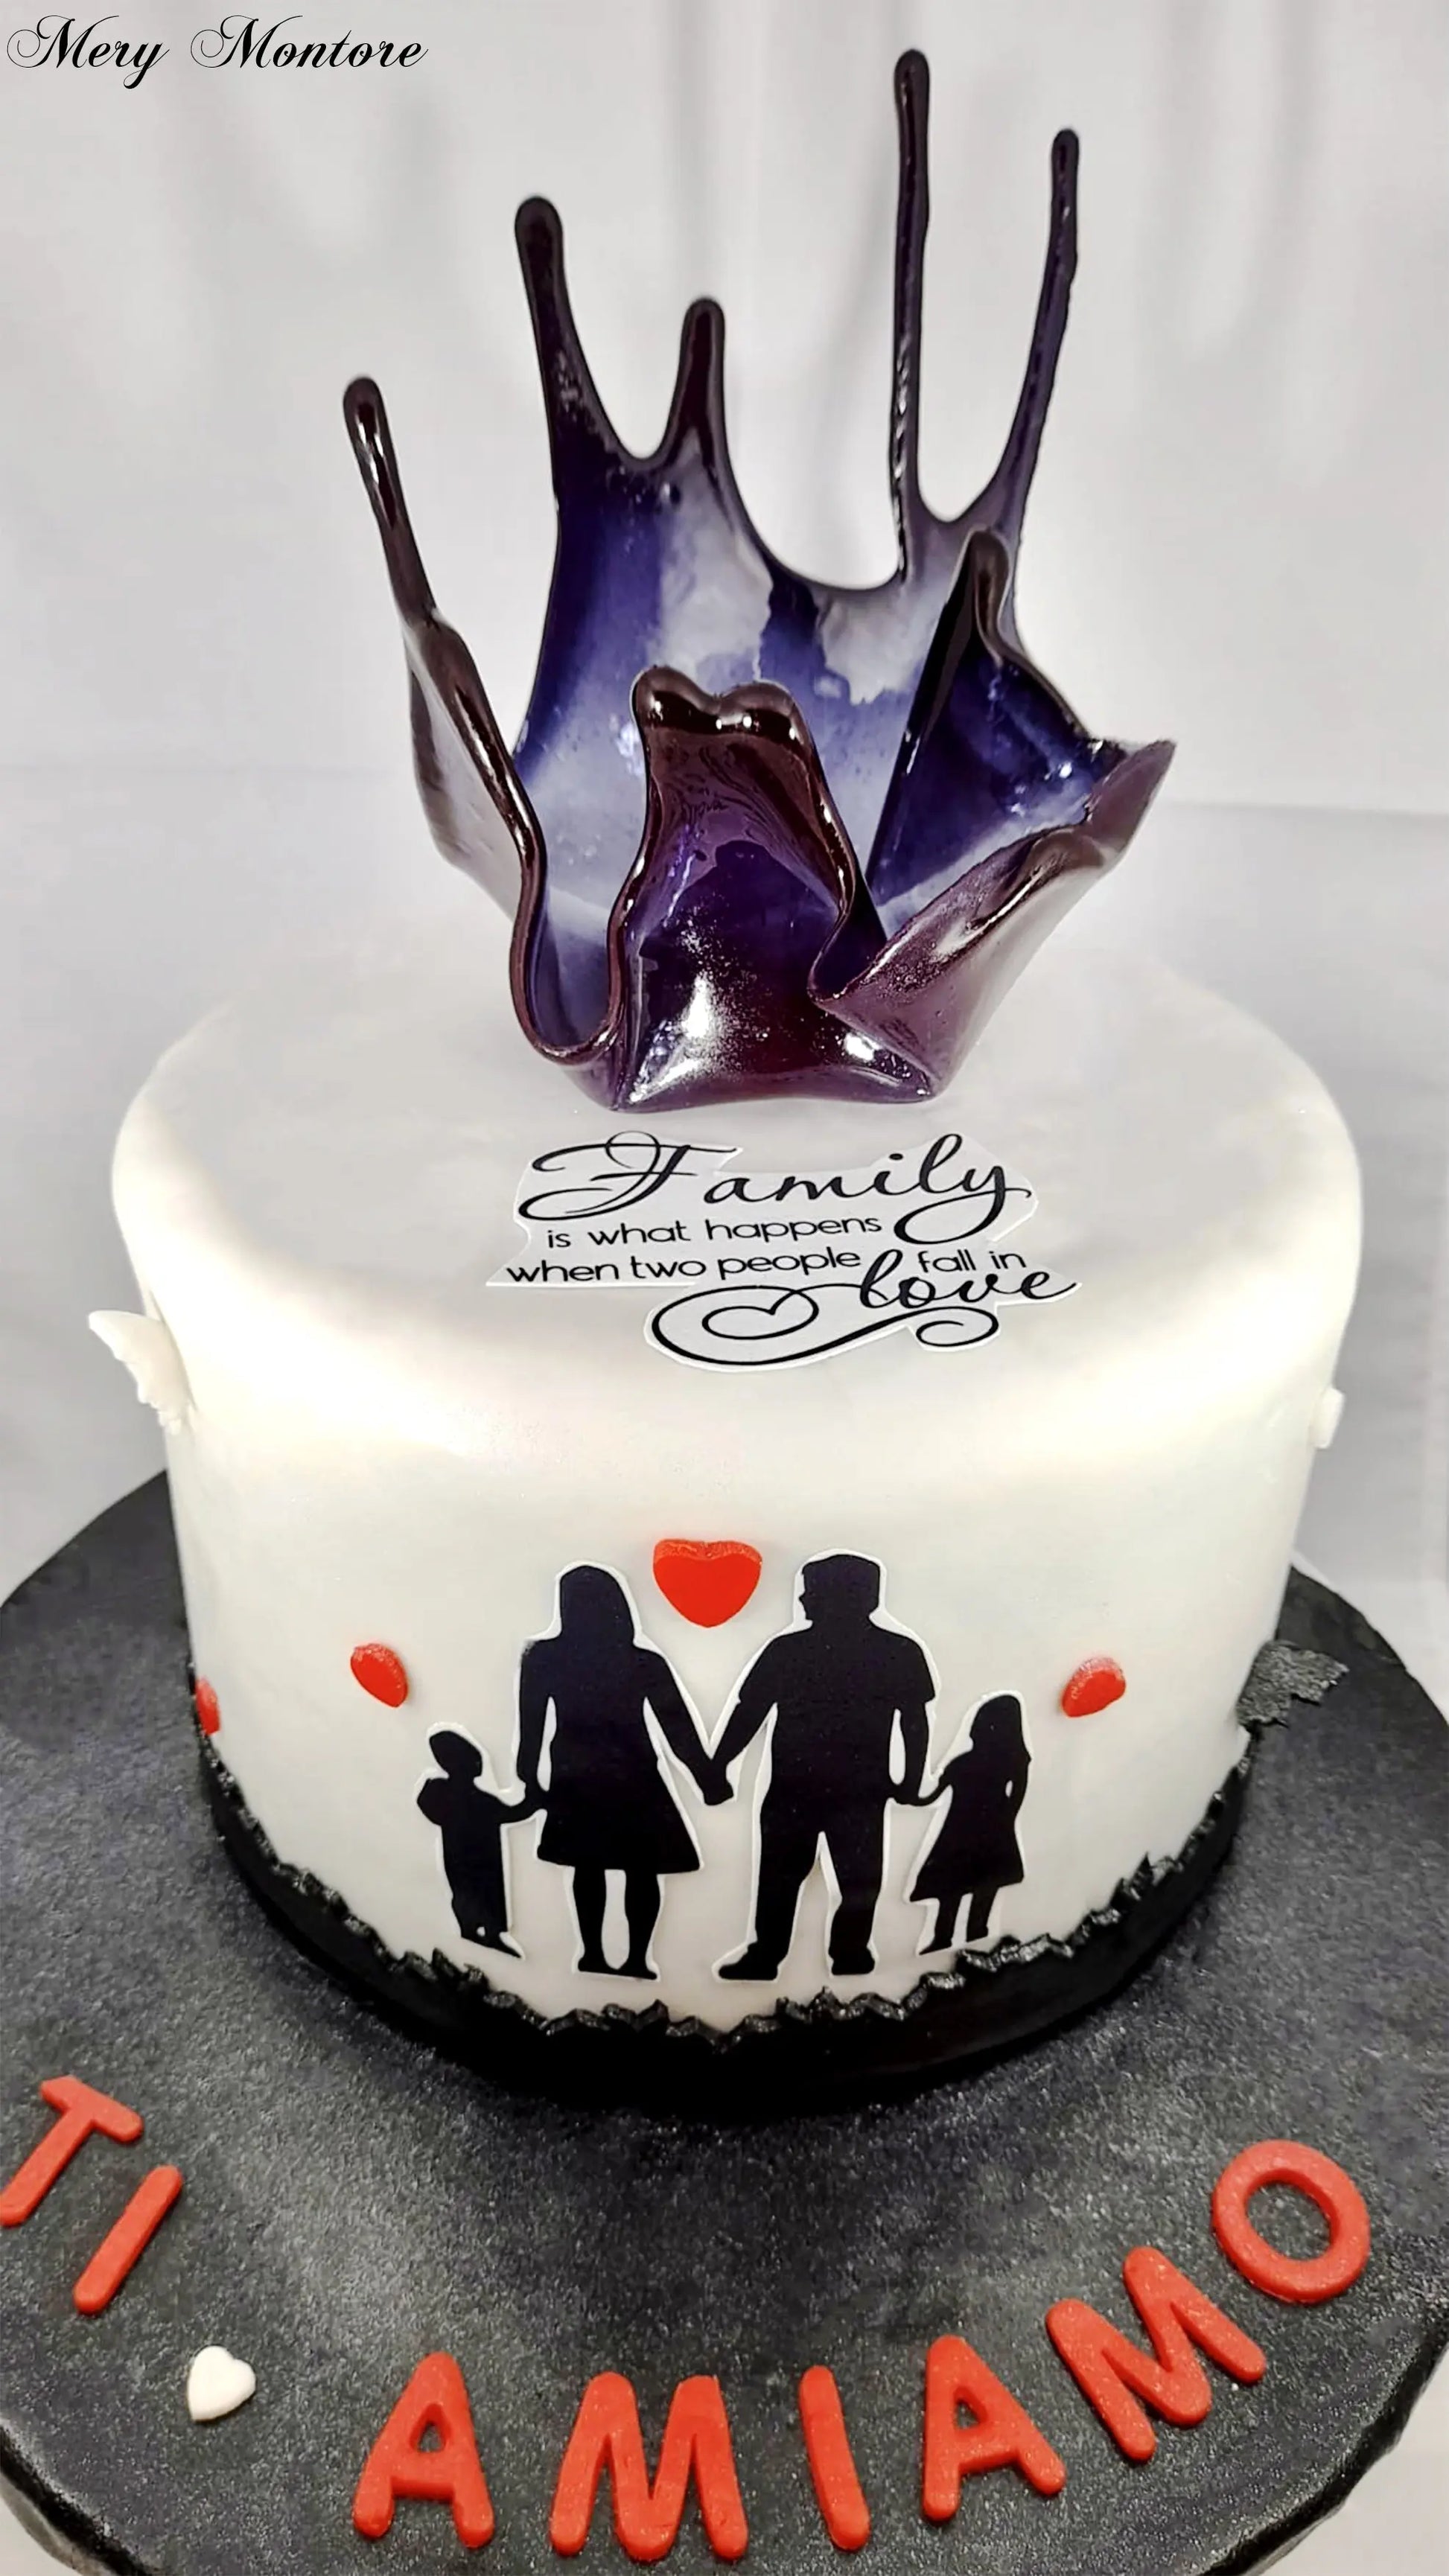 Family - Edible icing topper - sheet size 21 cm x 29 cm A4 MEG cookie cutters